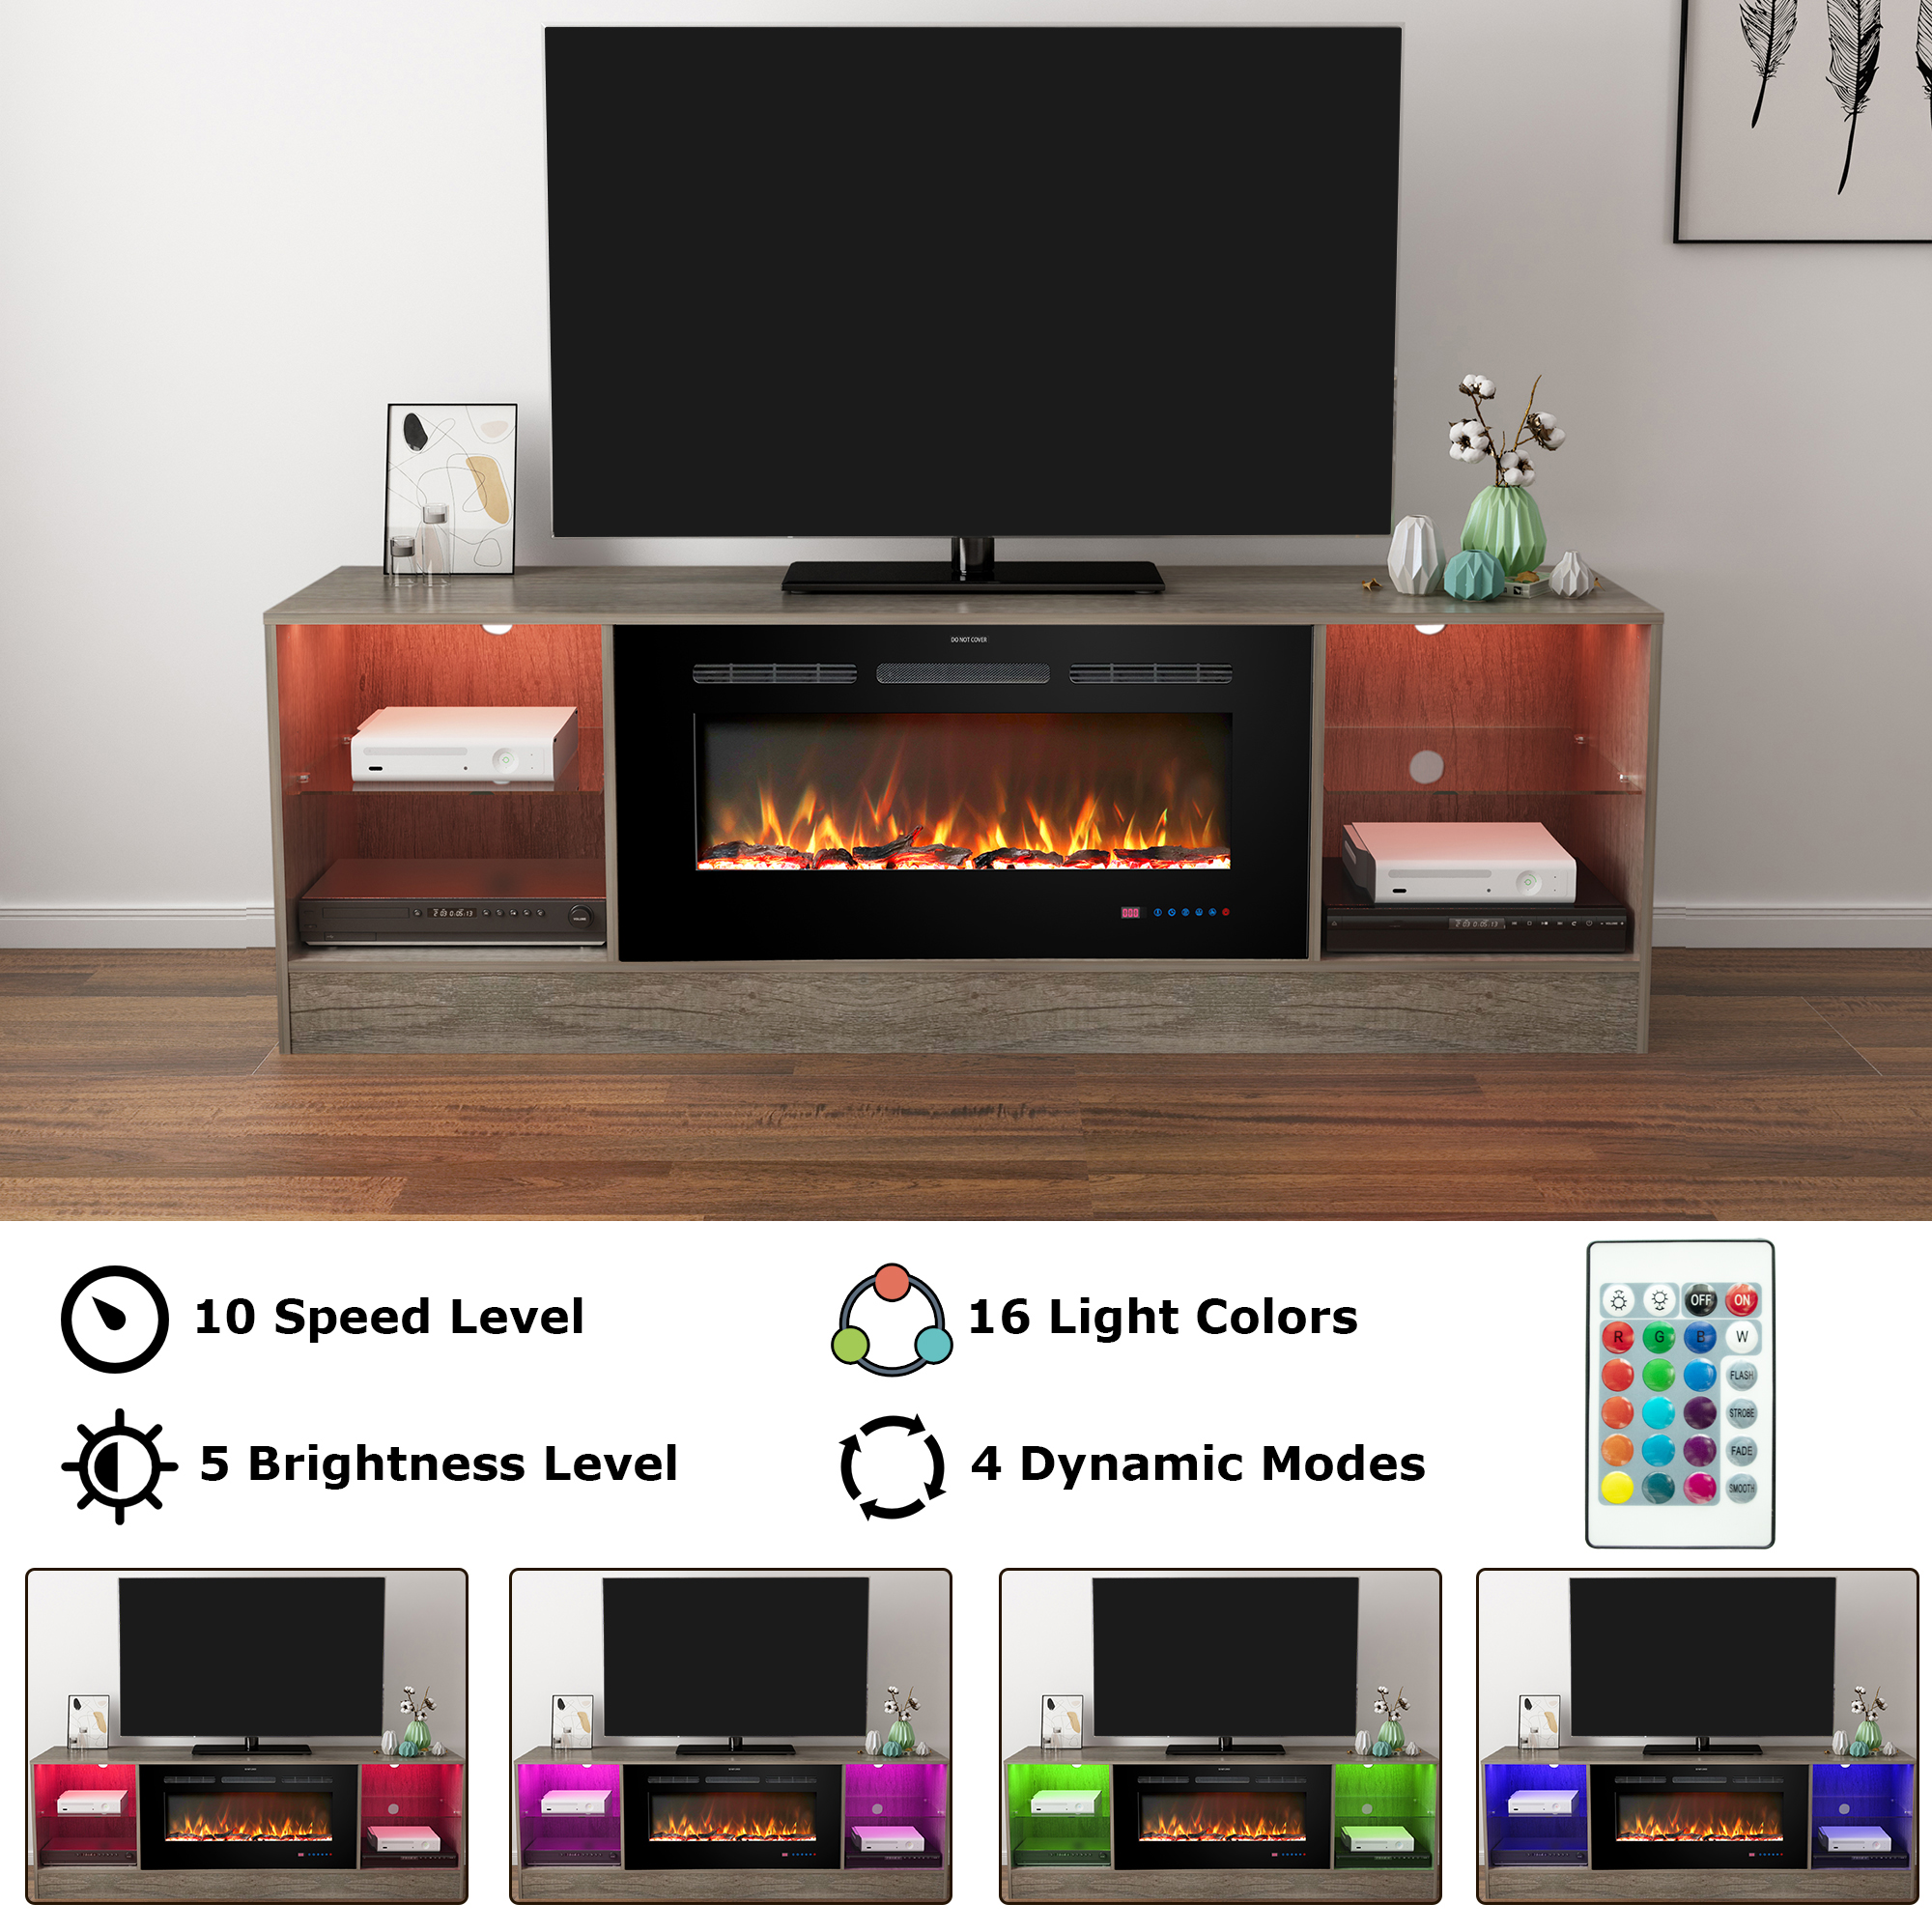 Fireplace 72" TV Stand with 36" Electric Fireplace, Entertainment Center for TVs Up To 80", LED Light, Gray